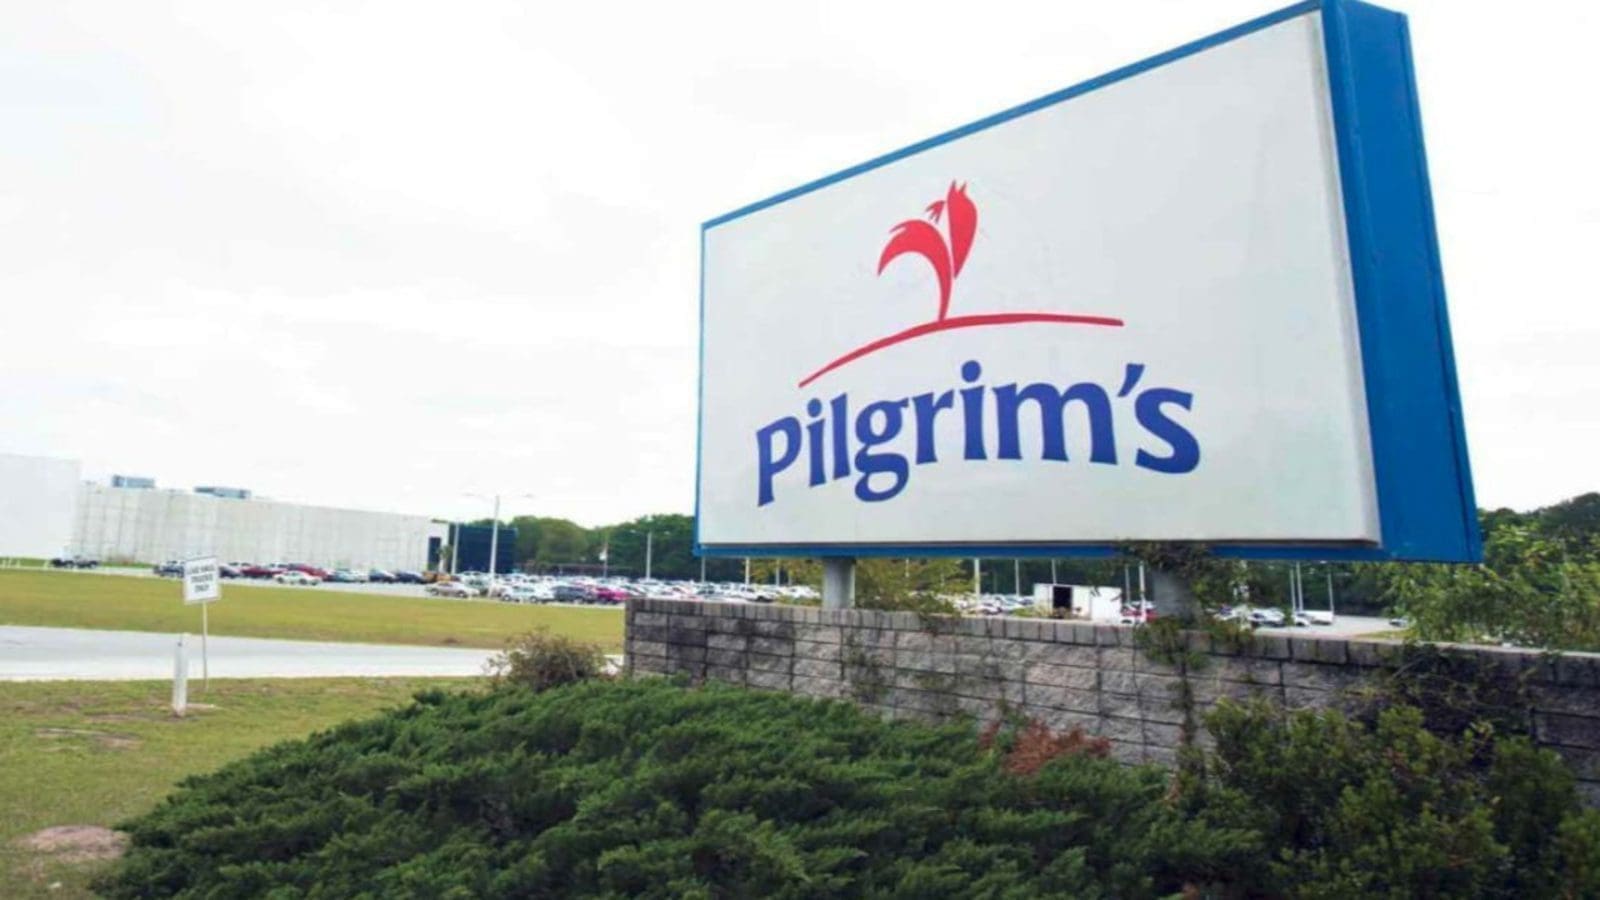 Pilgrim’s Pride reaps big in Q3, registering 16.8% net revenue growth as consumer tastes shifts from costly beef to cheaper chicken